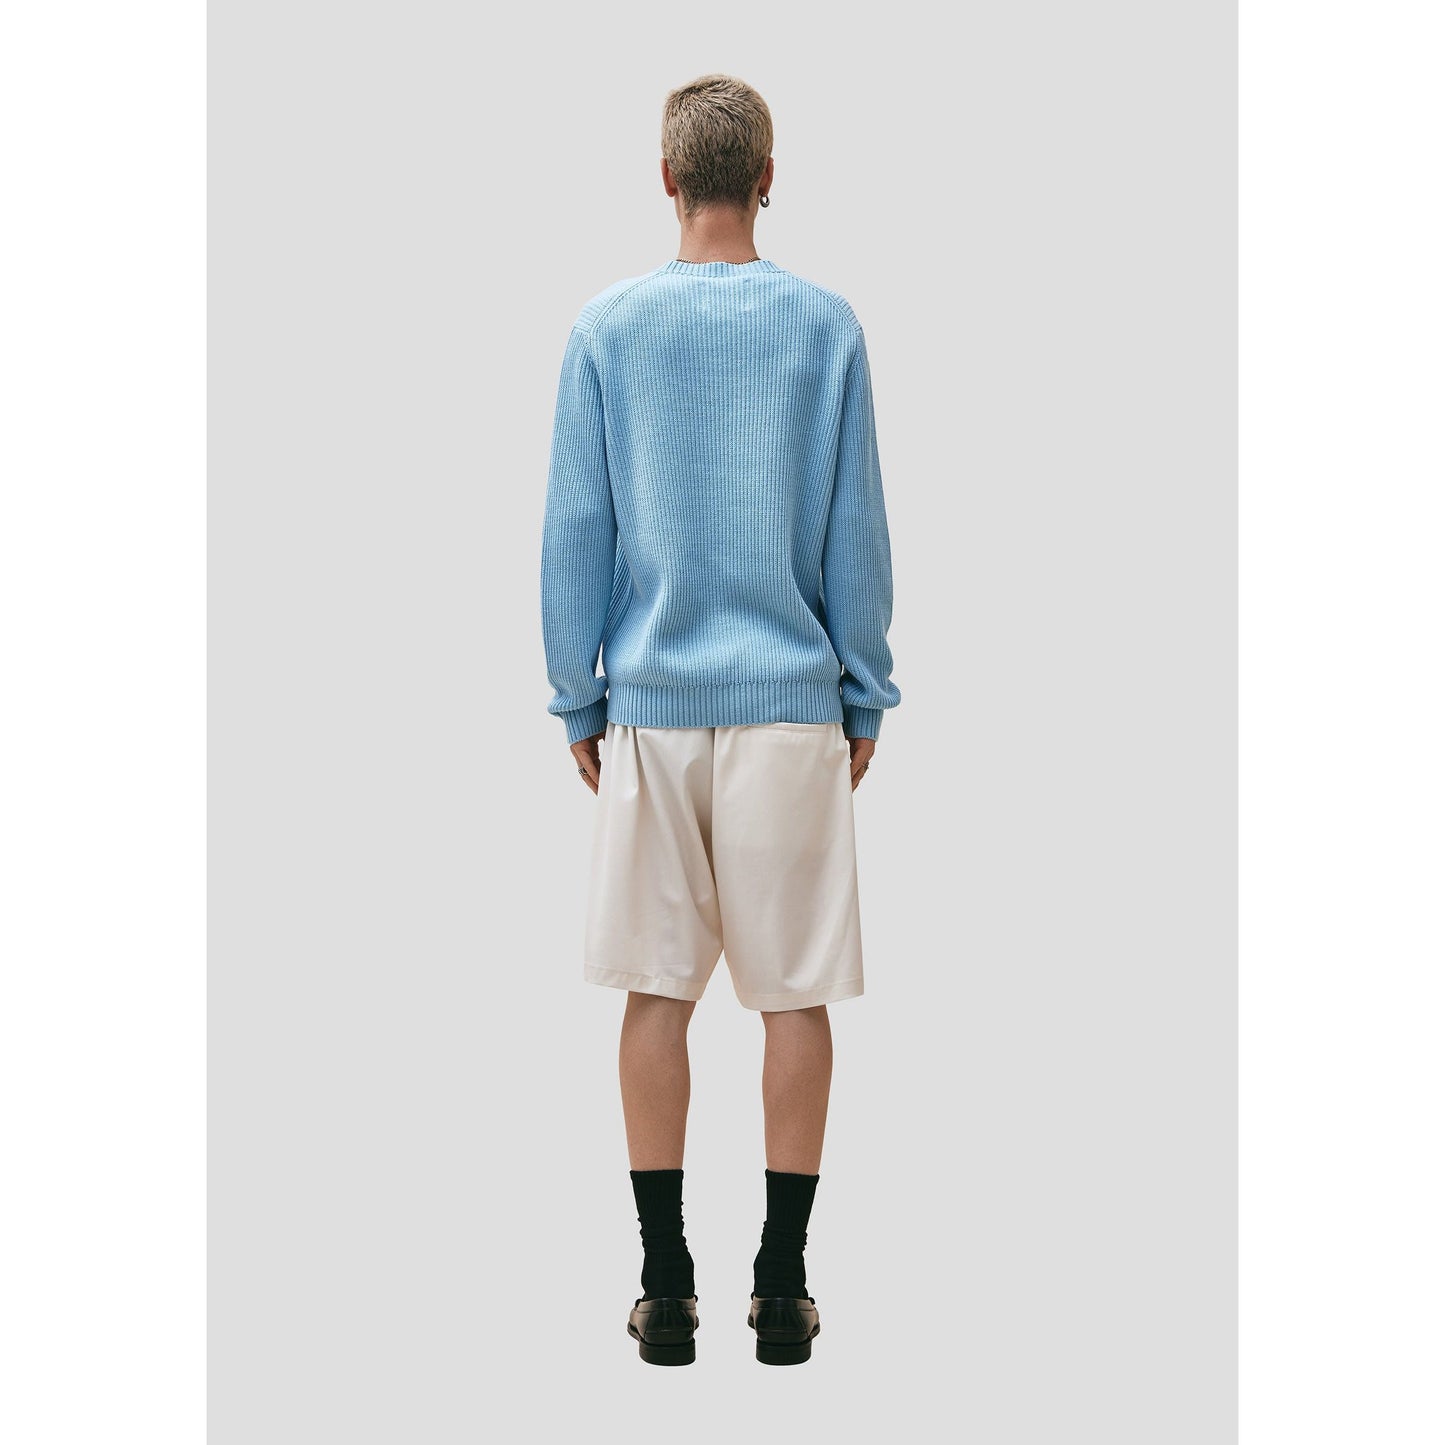 Man seen from behind wearing a Seven Gauge Wool Cotton Crewneck Sweater in Azzurro, white shorts, black socks, and brown shoes, standing against a gray background.